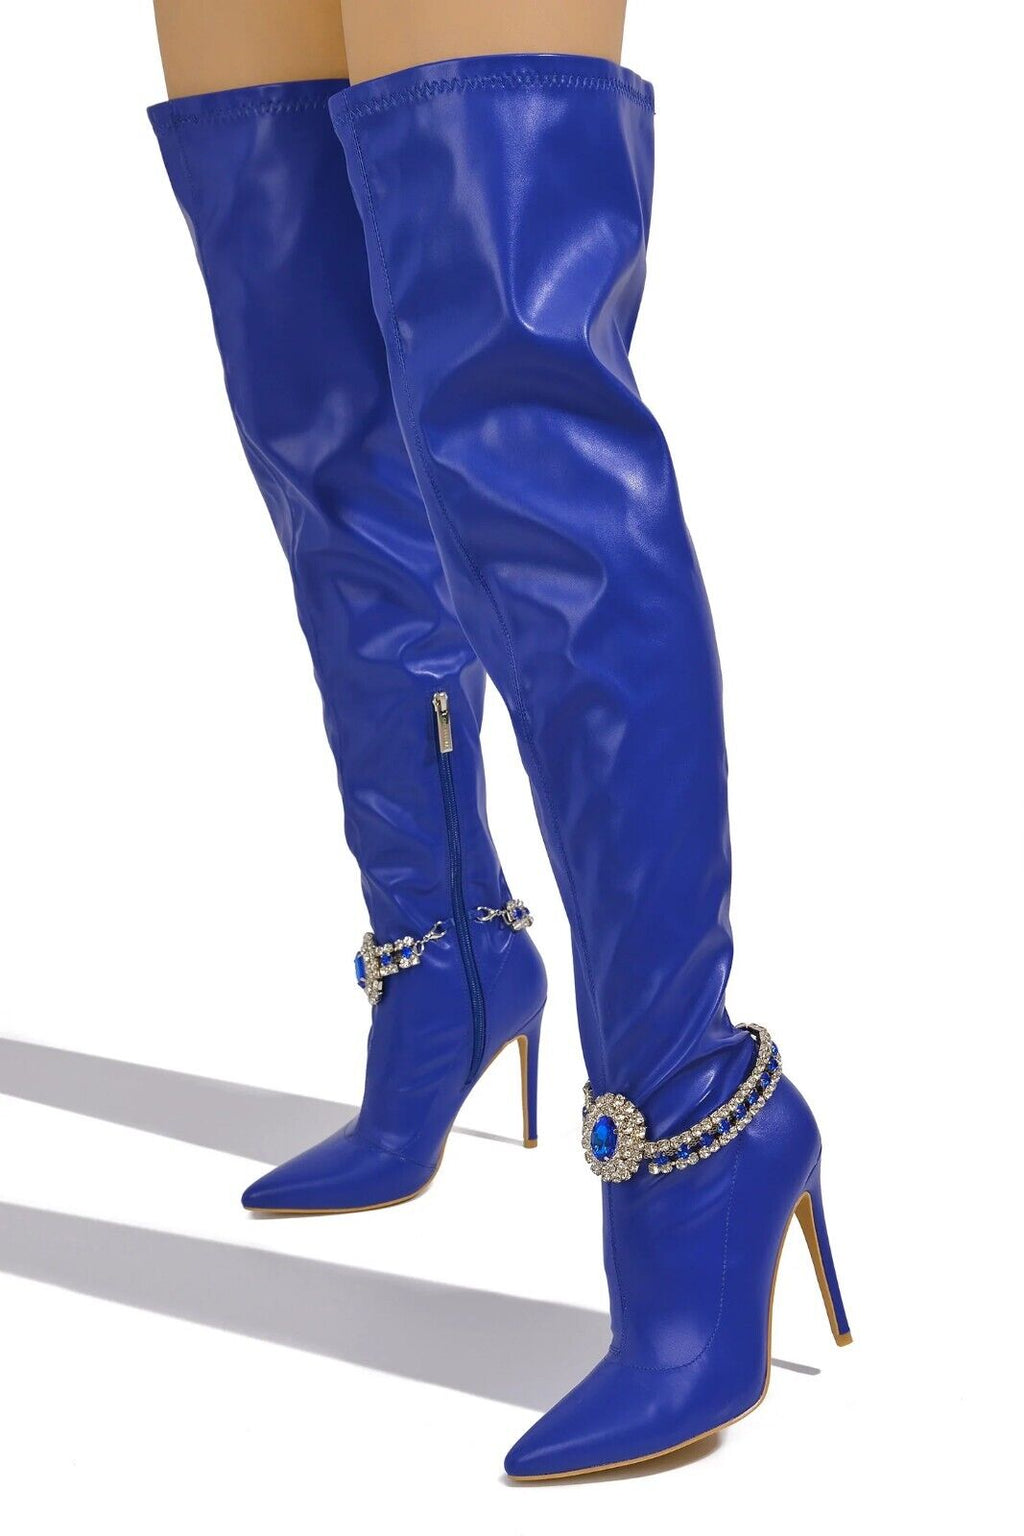 Lawless Bold Blue Stretch Leatherette Rhinestone Ankle Bracelet Thigh High Boots - Totally Wicked Footwear